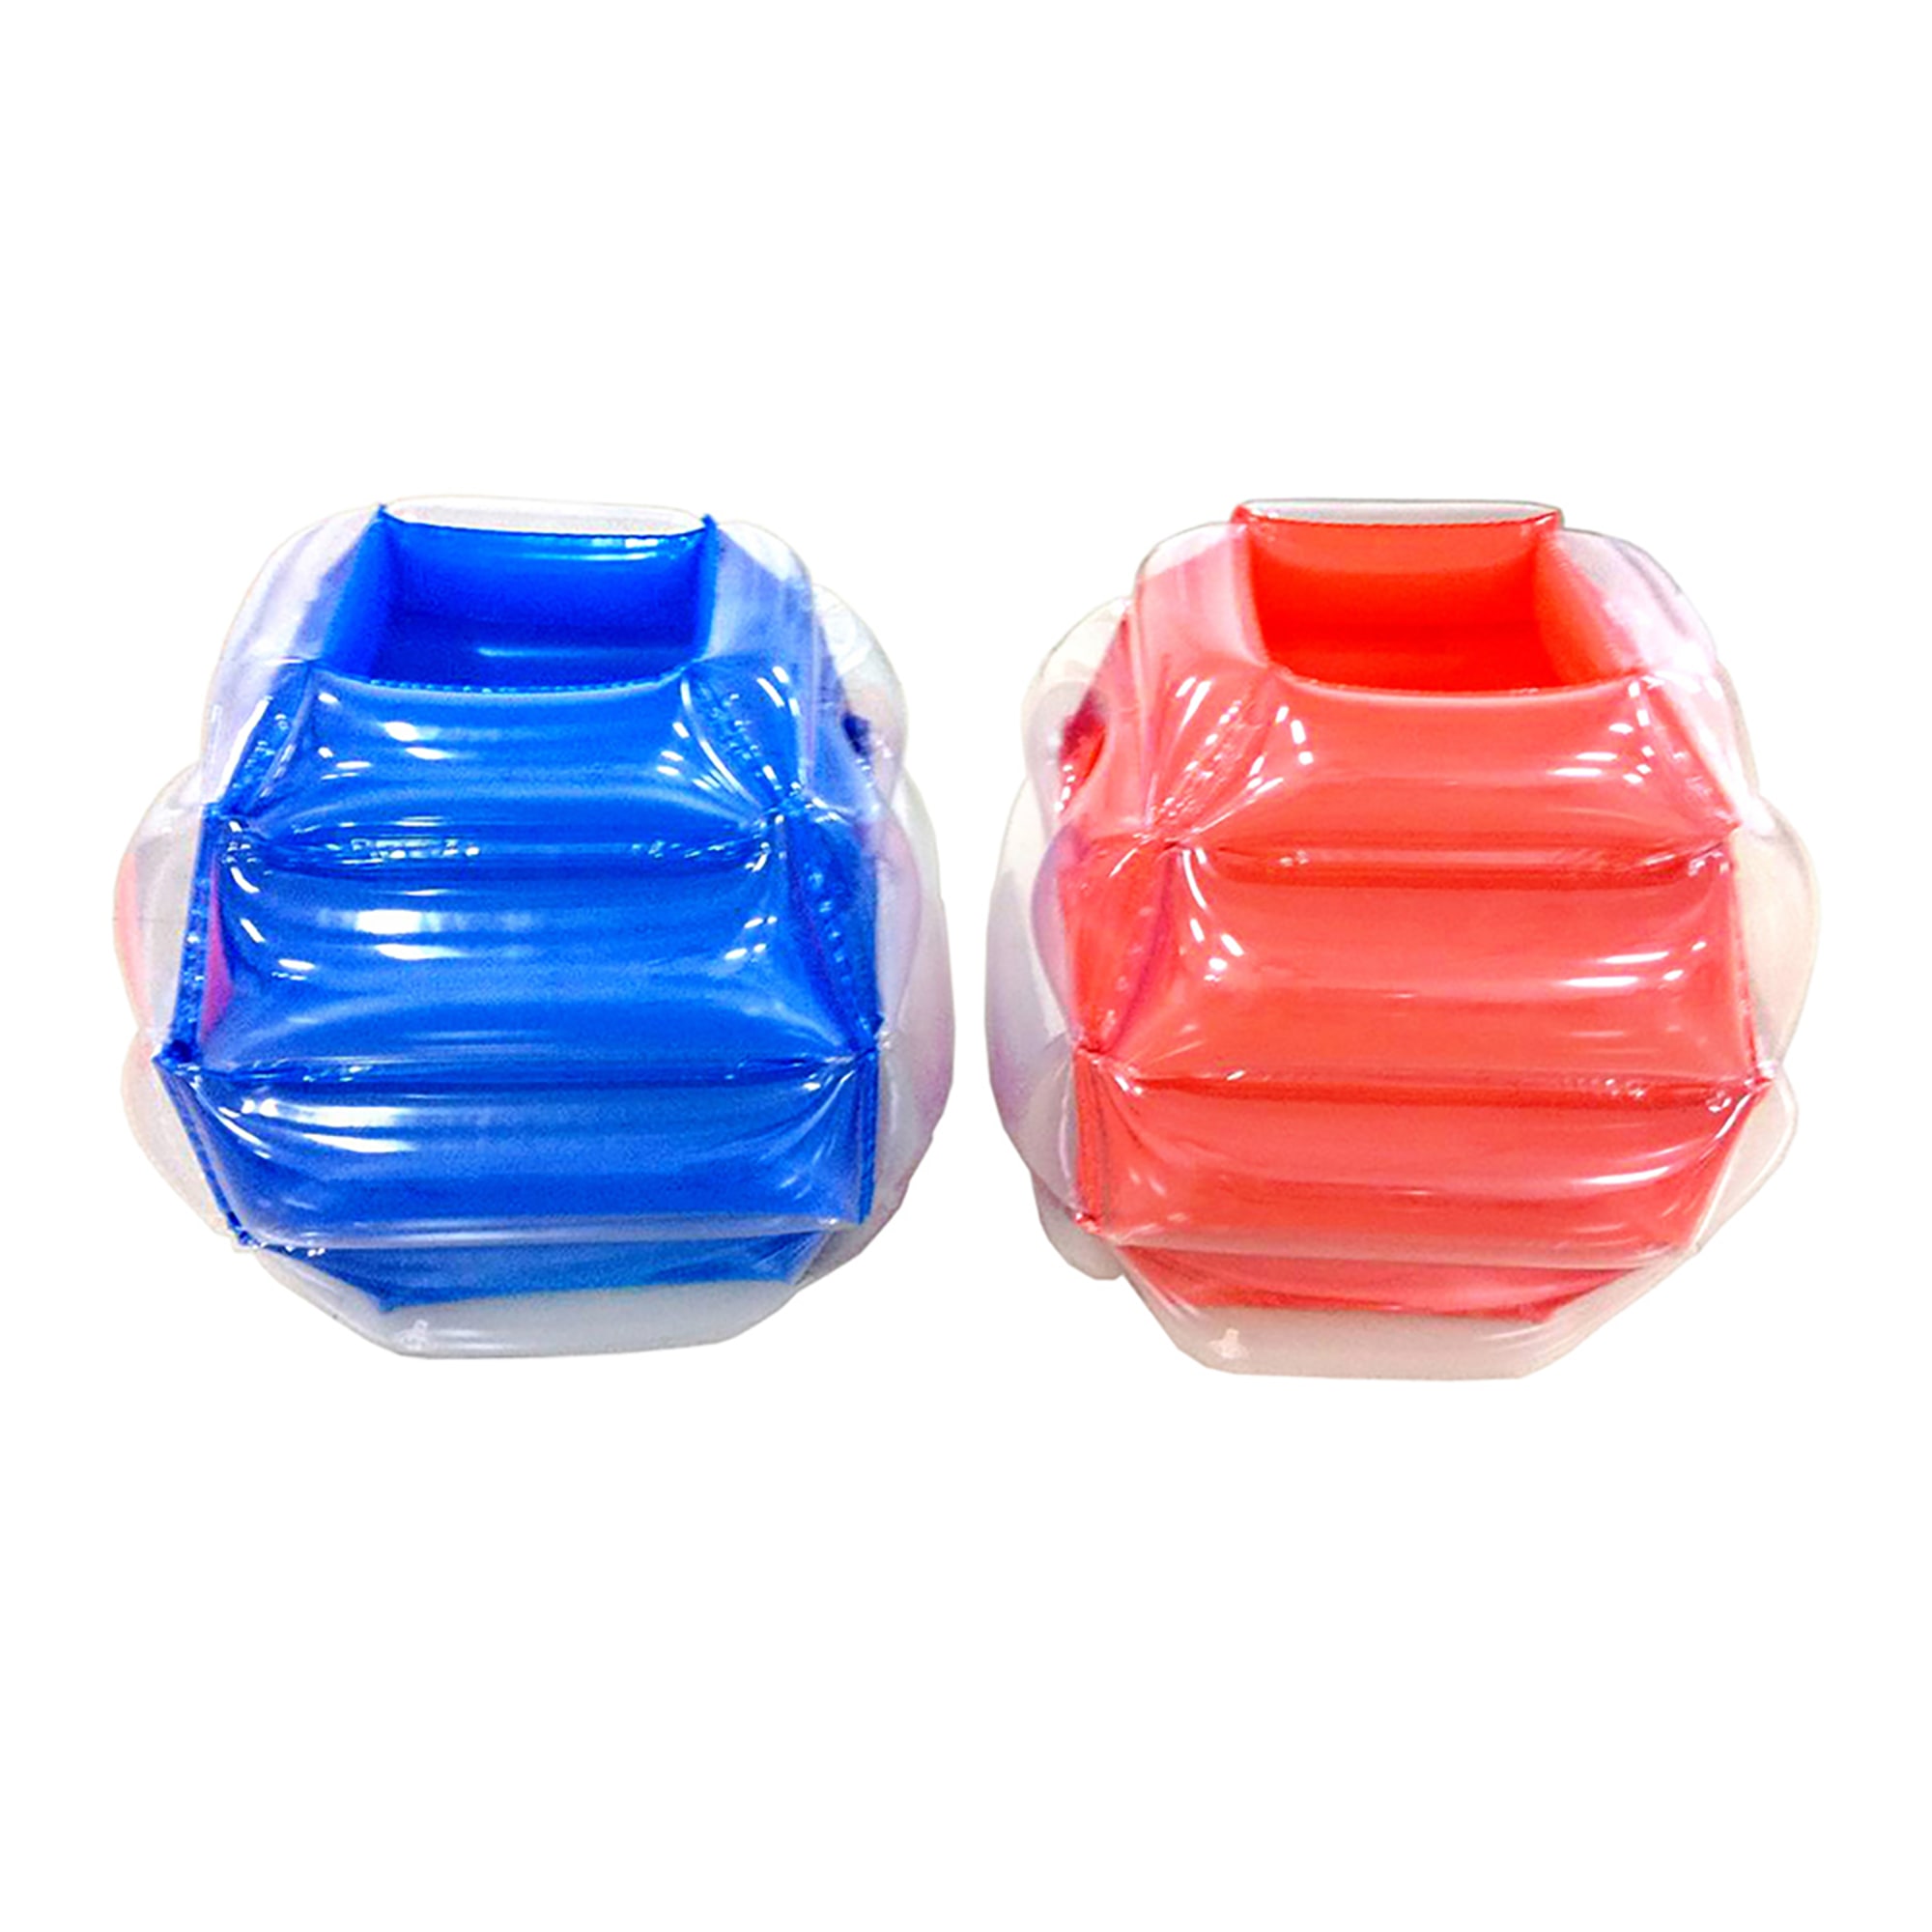 Banzai Bump N Bounce Plastic Body Bumpers in Red & Blue, 2 Bumpers, Kids Toy, 4+ - image 2 of 3